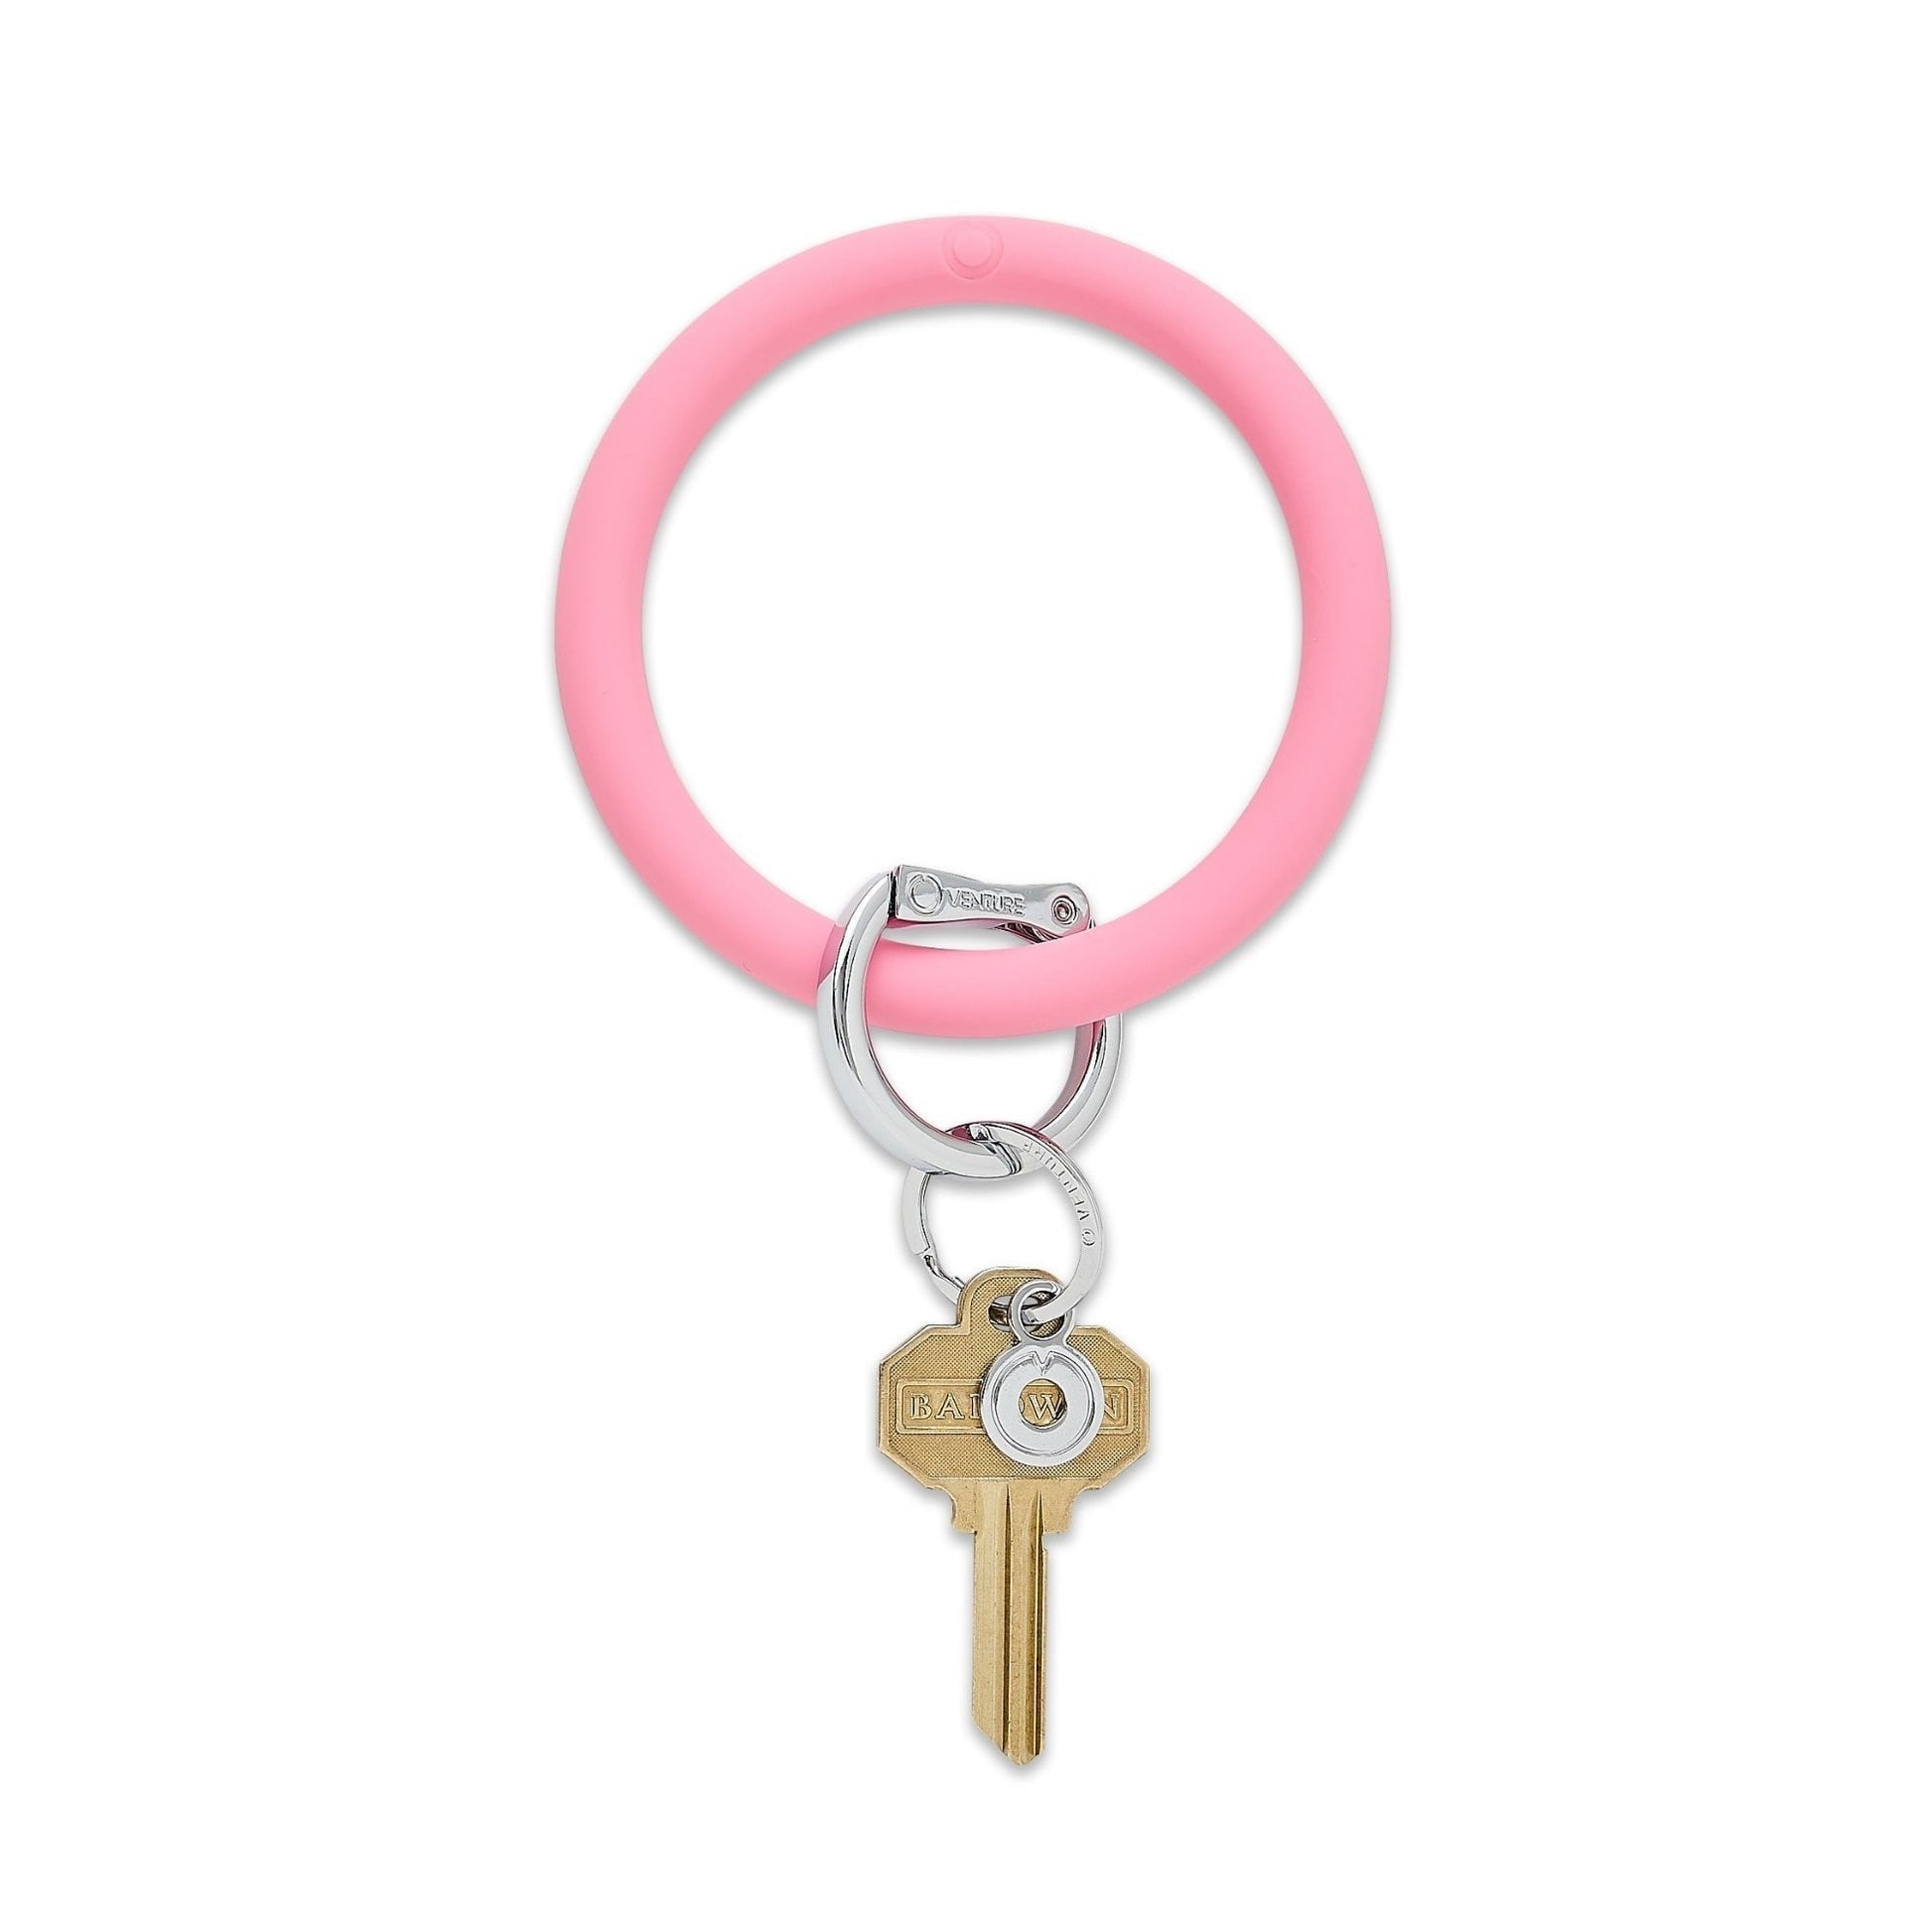 Cotton Candy silicone Big O Key Ring with silver Oventure locking clasp.